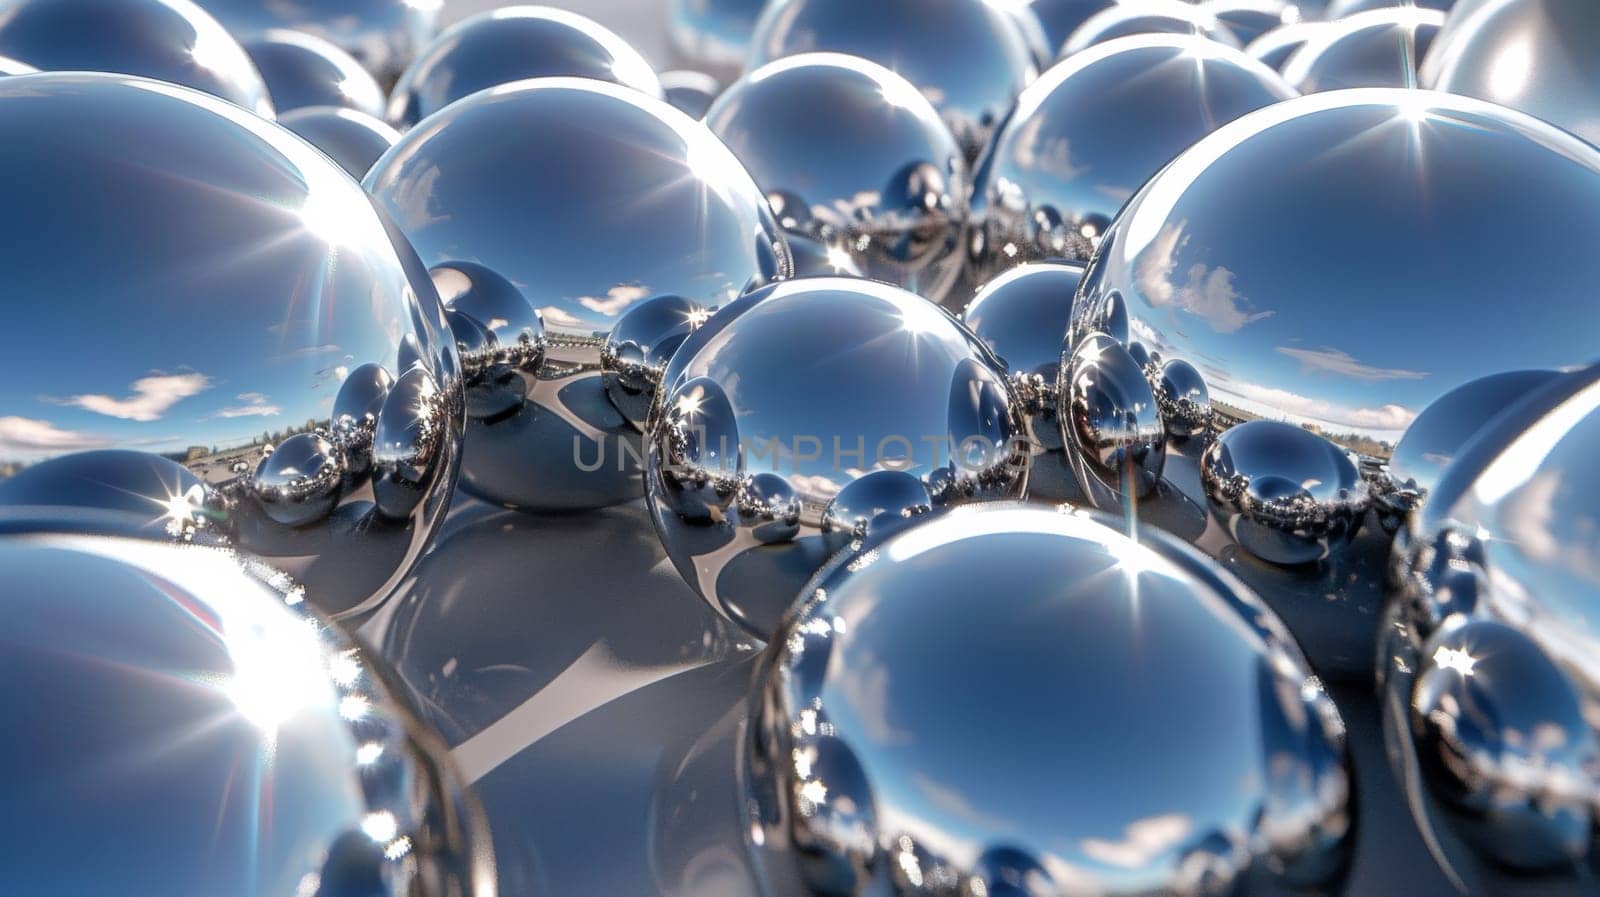 A group of shiny balls are arranged in a circle